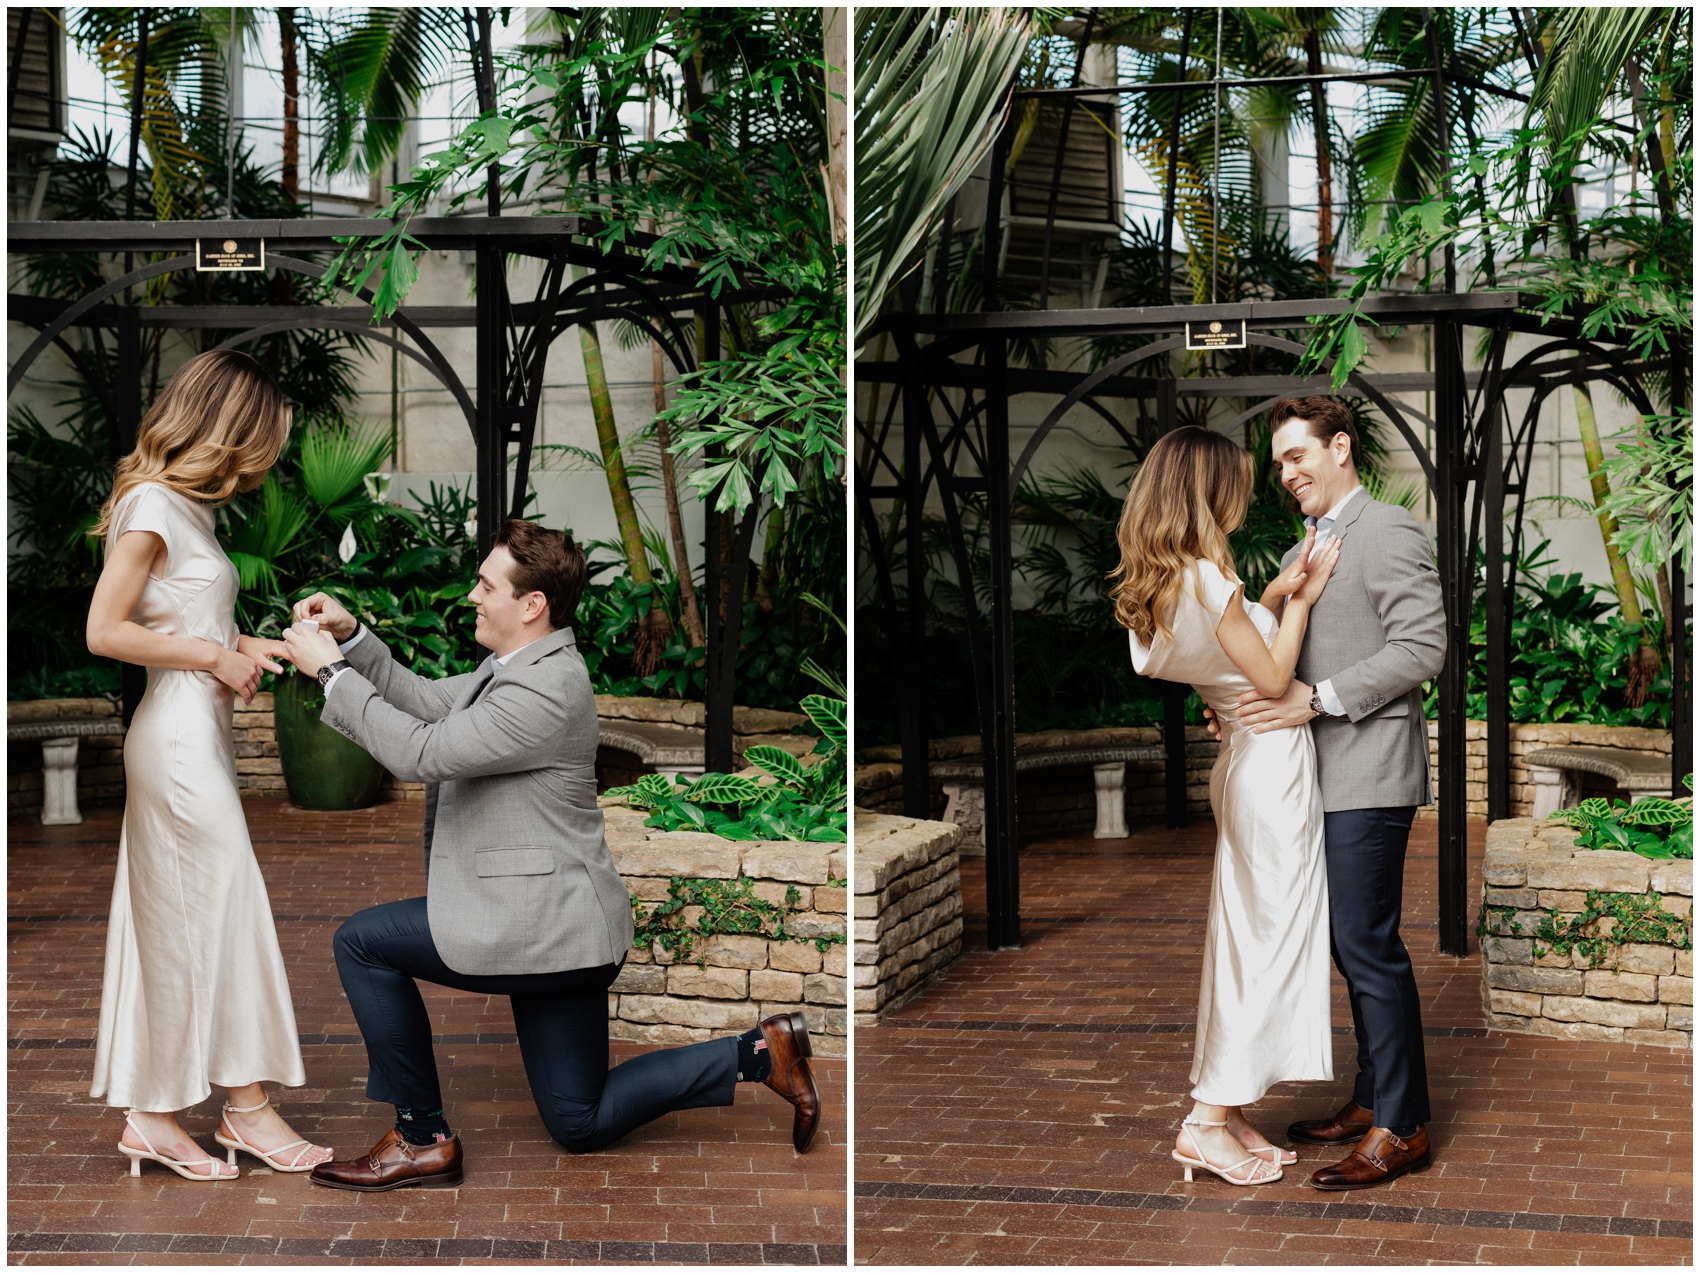 Adam Lowe photography, Columbus, Ohio, wedding, editorial, fashion, commercial, Franklin park conservatory, surprise proposal, engaged, engagement, wedding, love, couple